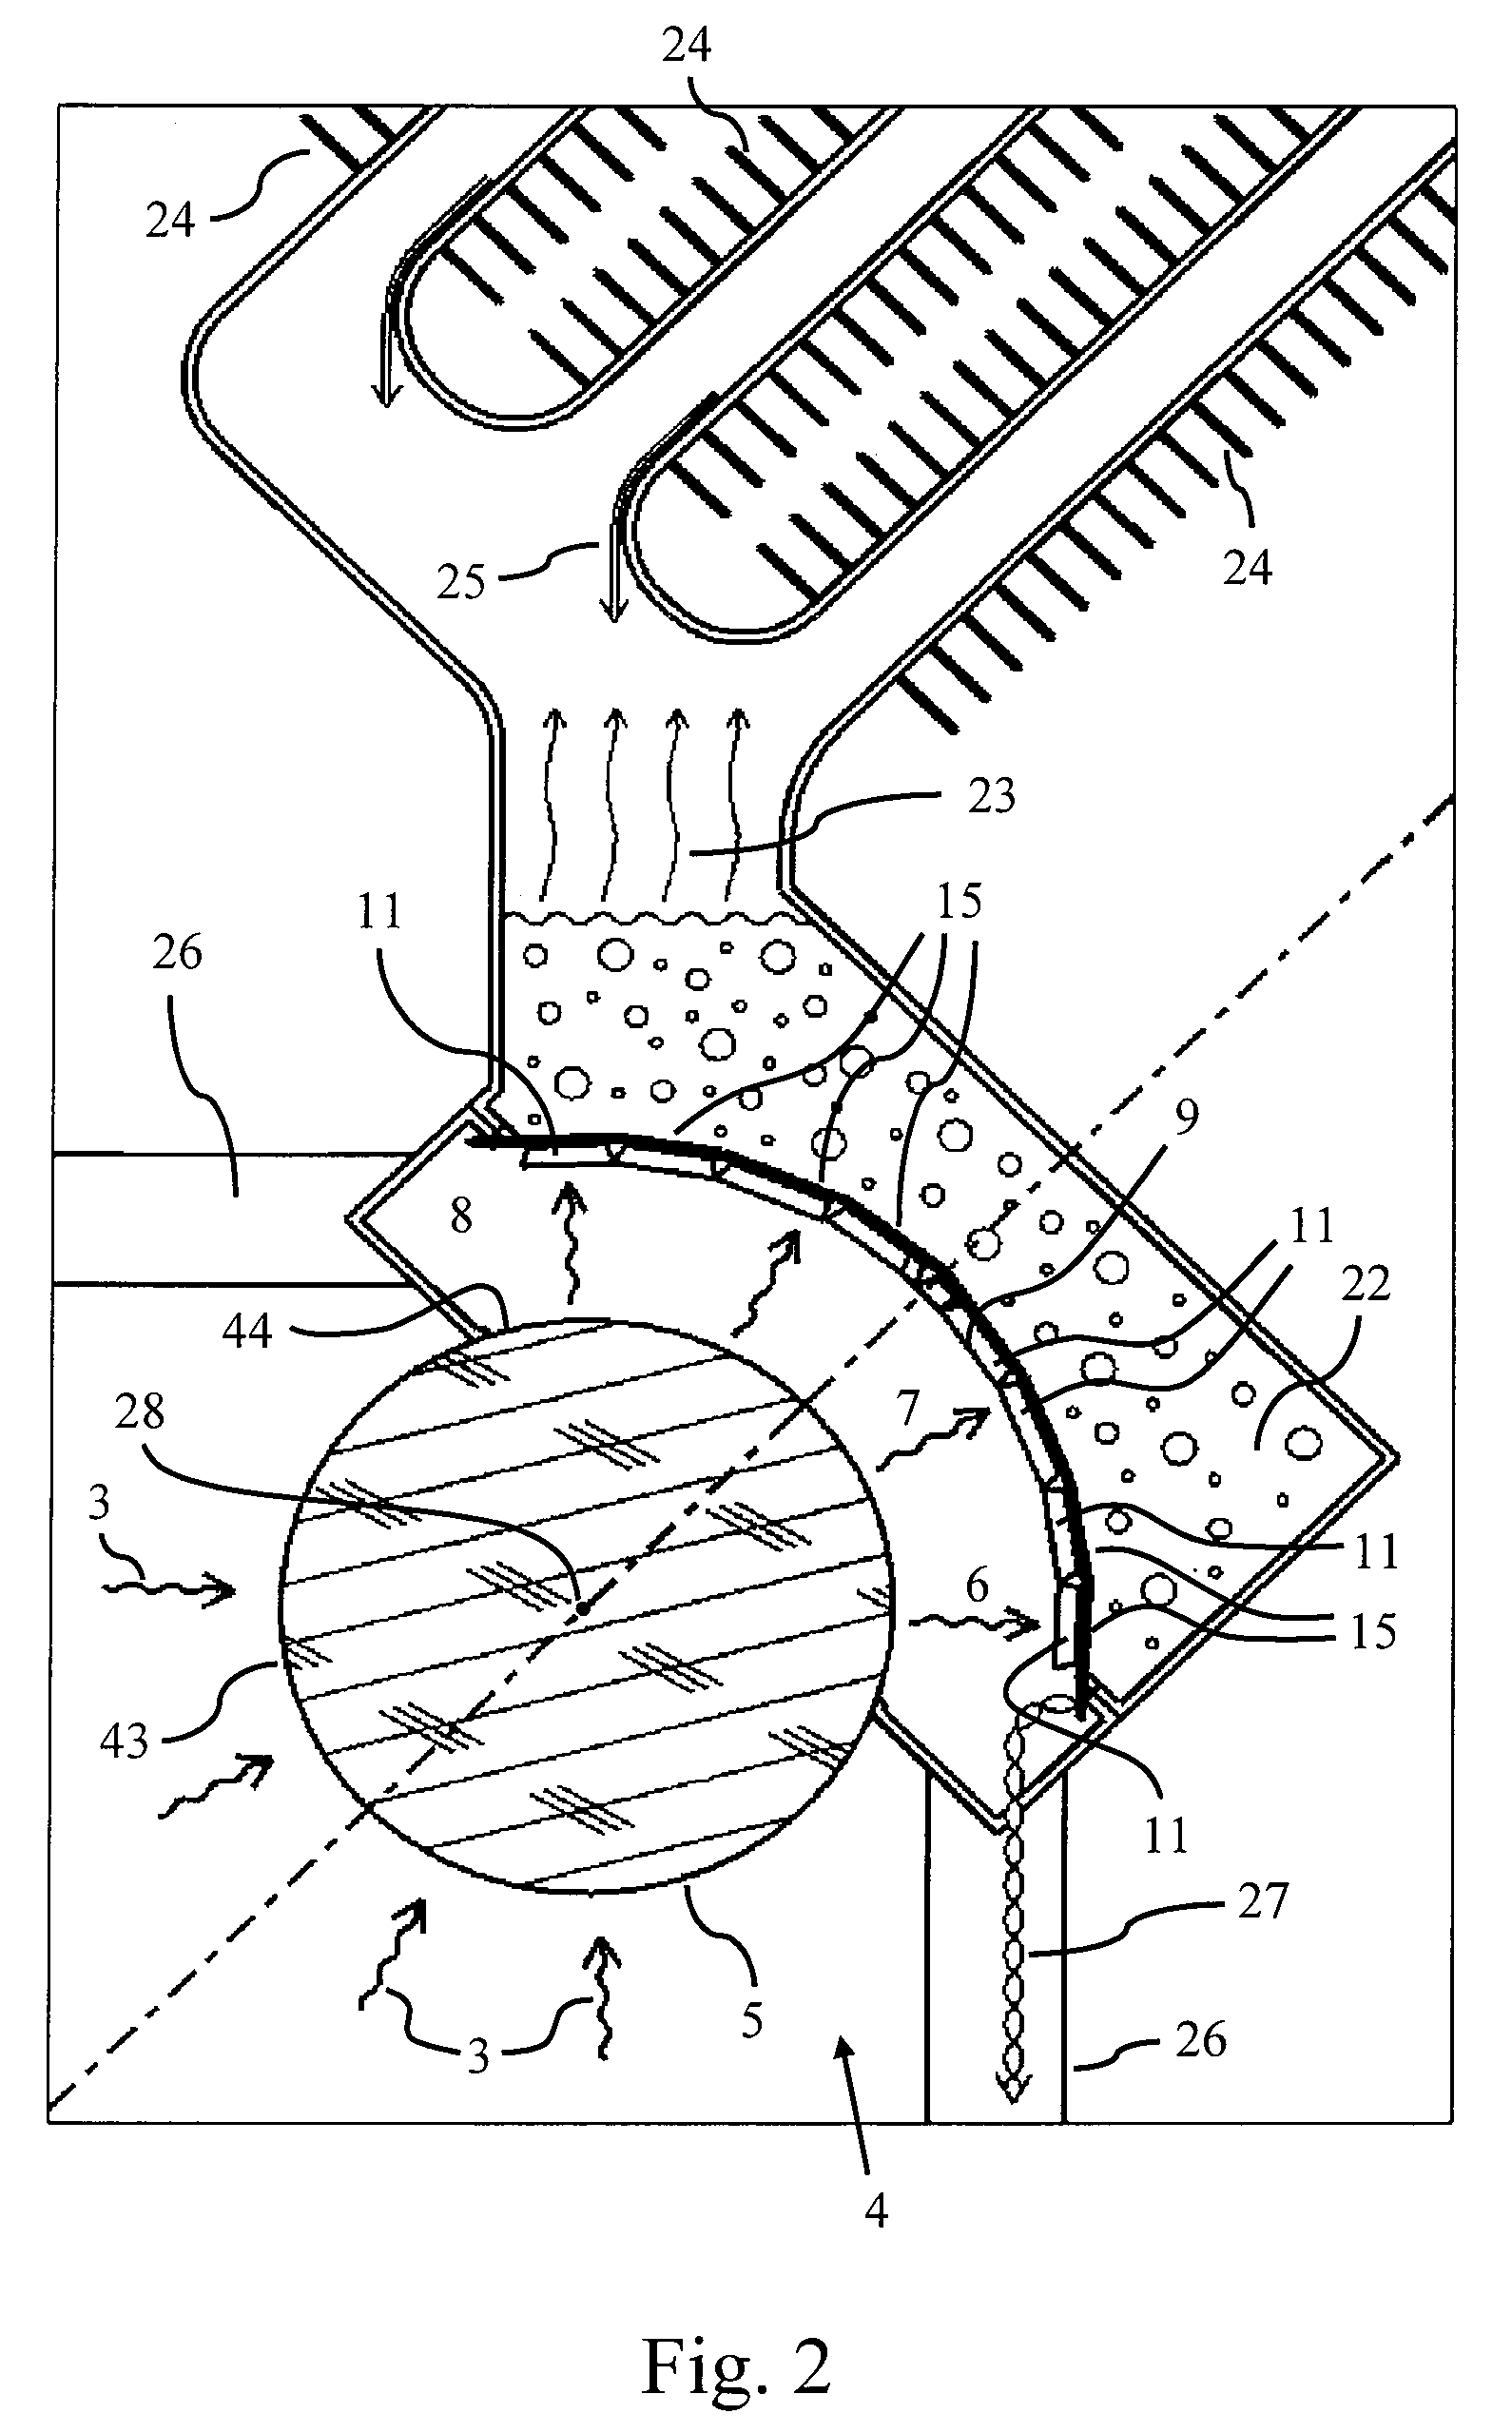 Photovoltaic generator with a spherical imaging lens for use with a paraboloidal solar reflector